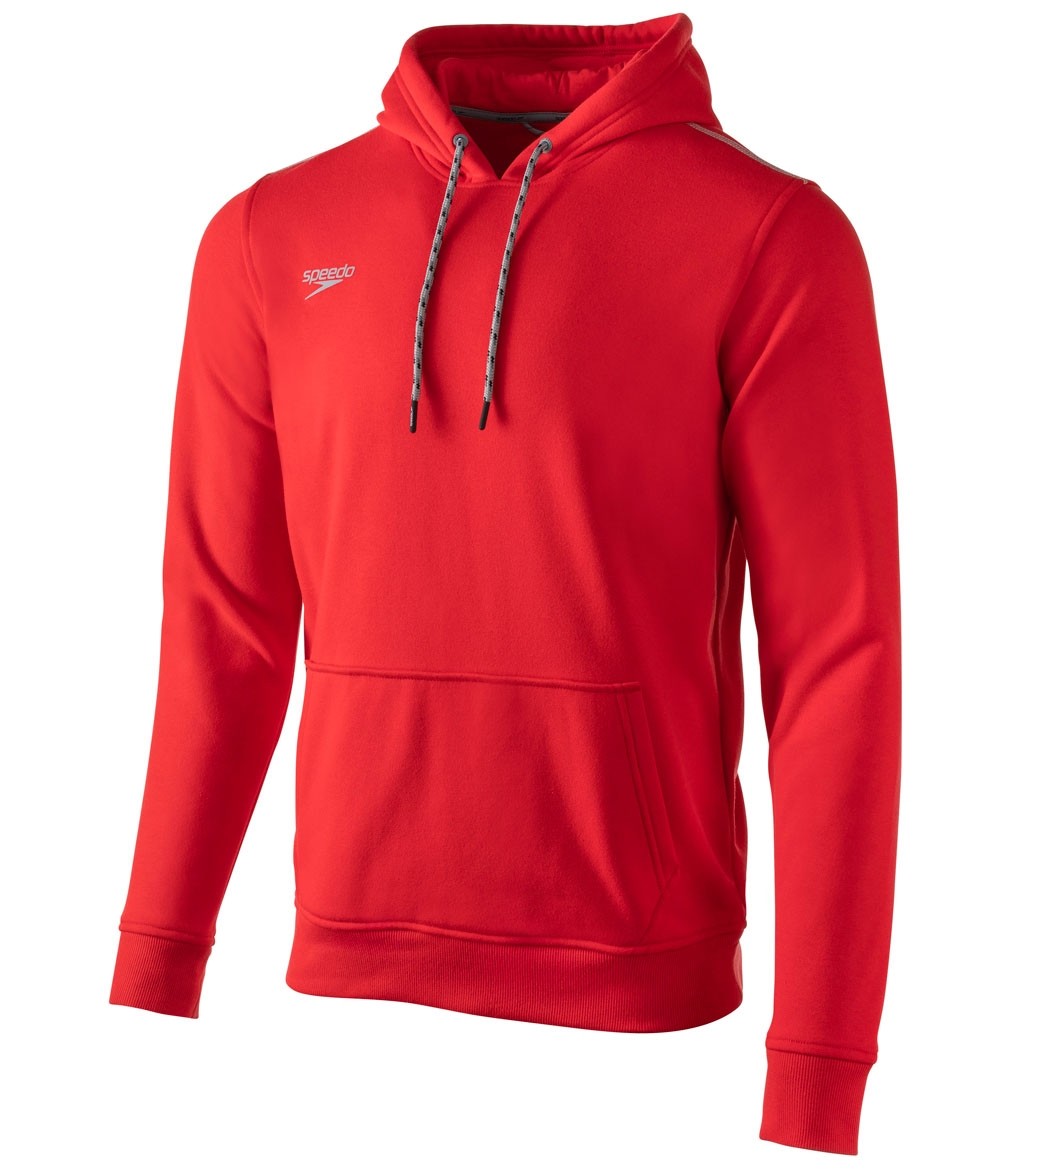 Speedo Men's Long Sleeve Hooded Sweatshirt - Red 2Xs Size X-Small Cotton/Polyester - Swimoutlet.com